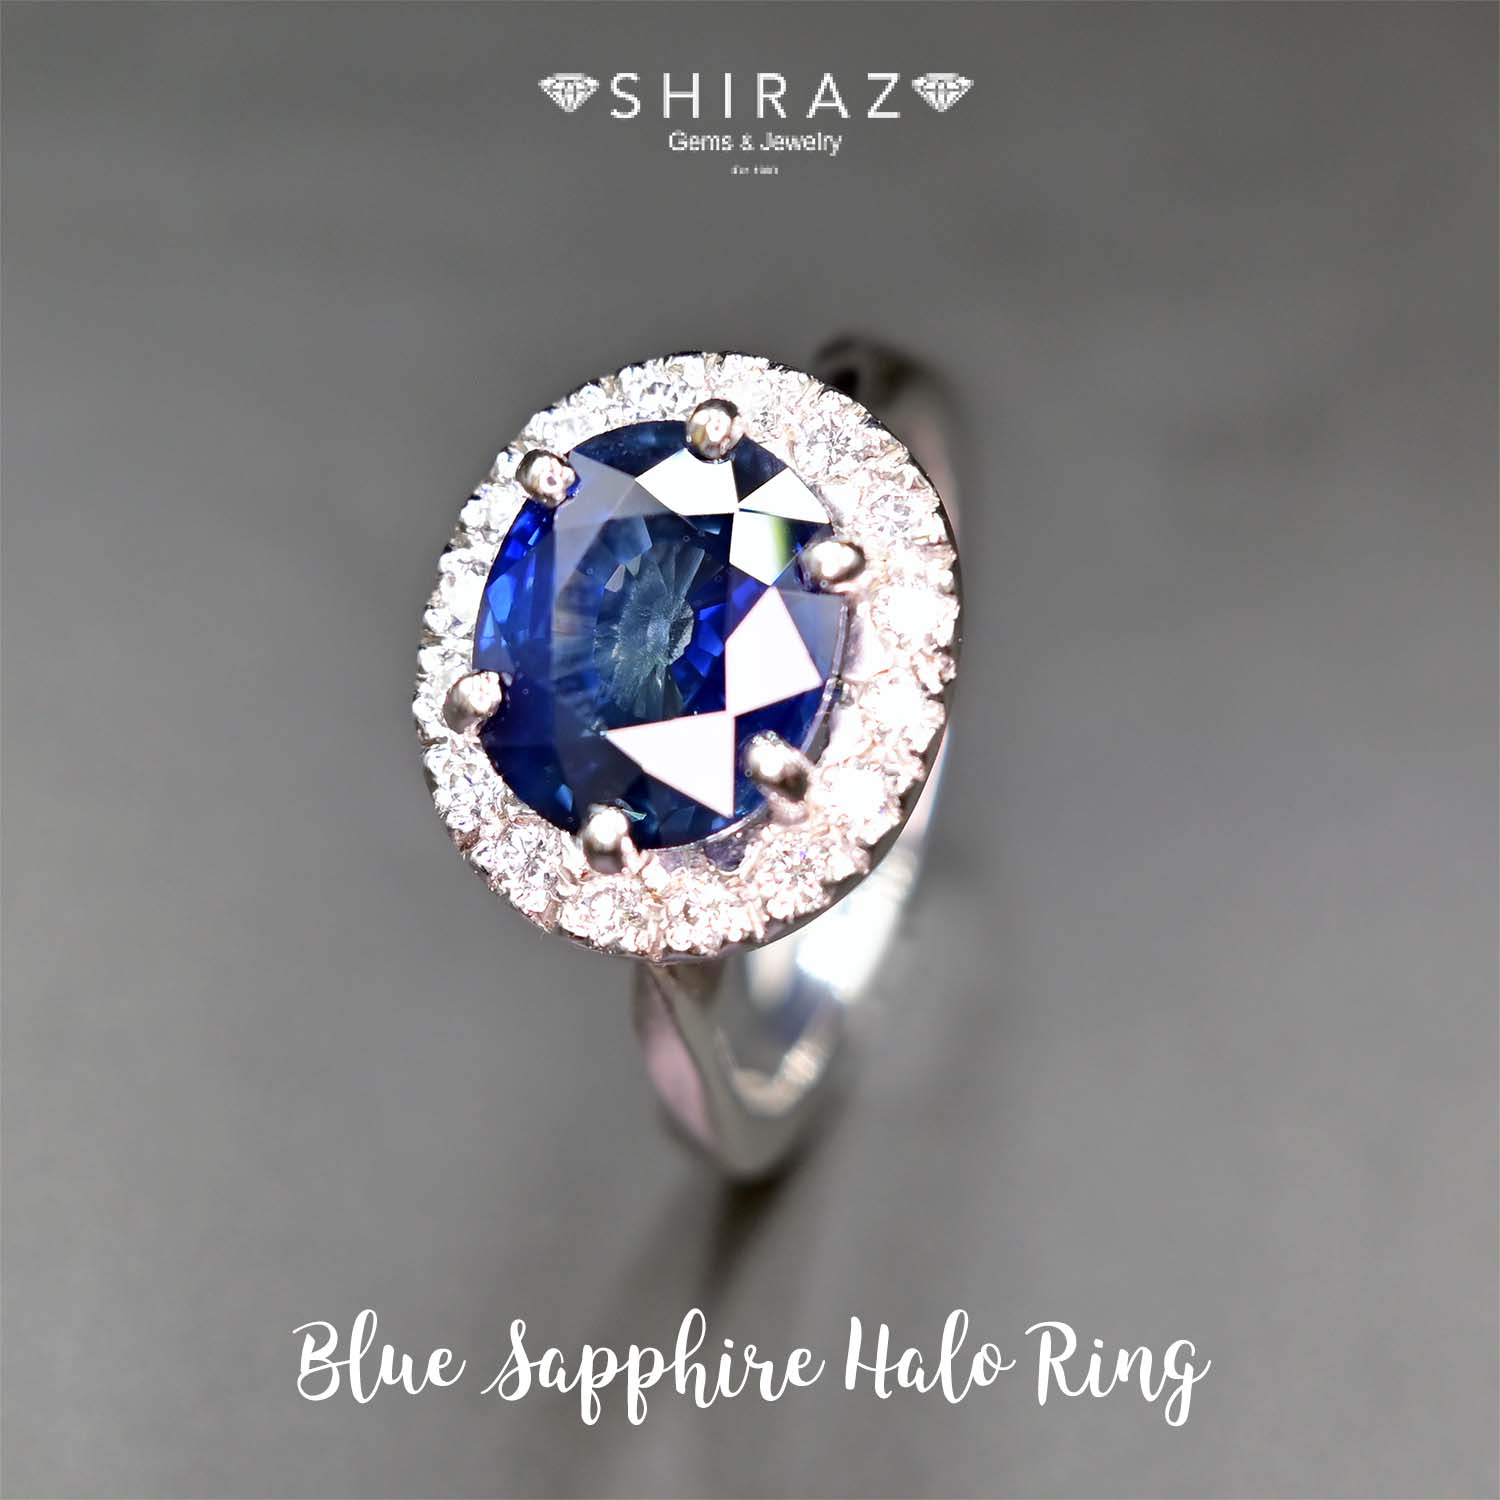 5 Reasons to get a Blue Sapphire Ring - Be the talk of the town with this stunning blue sapphire with diamond halo ring in 18k white gold!